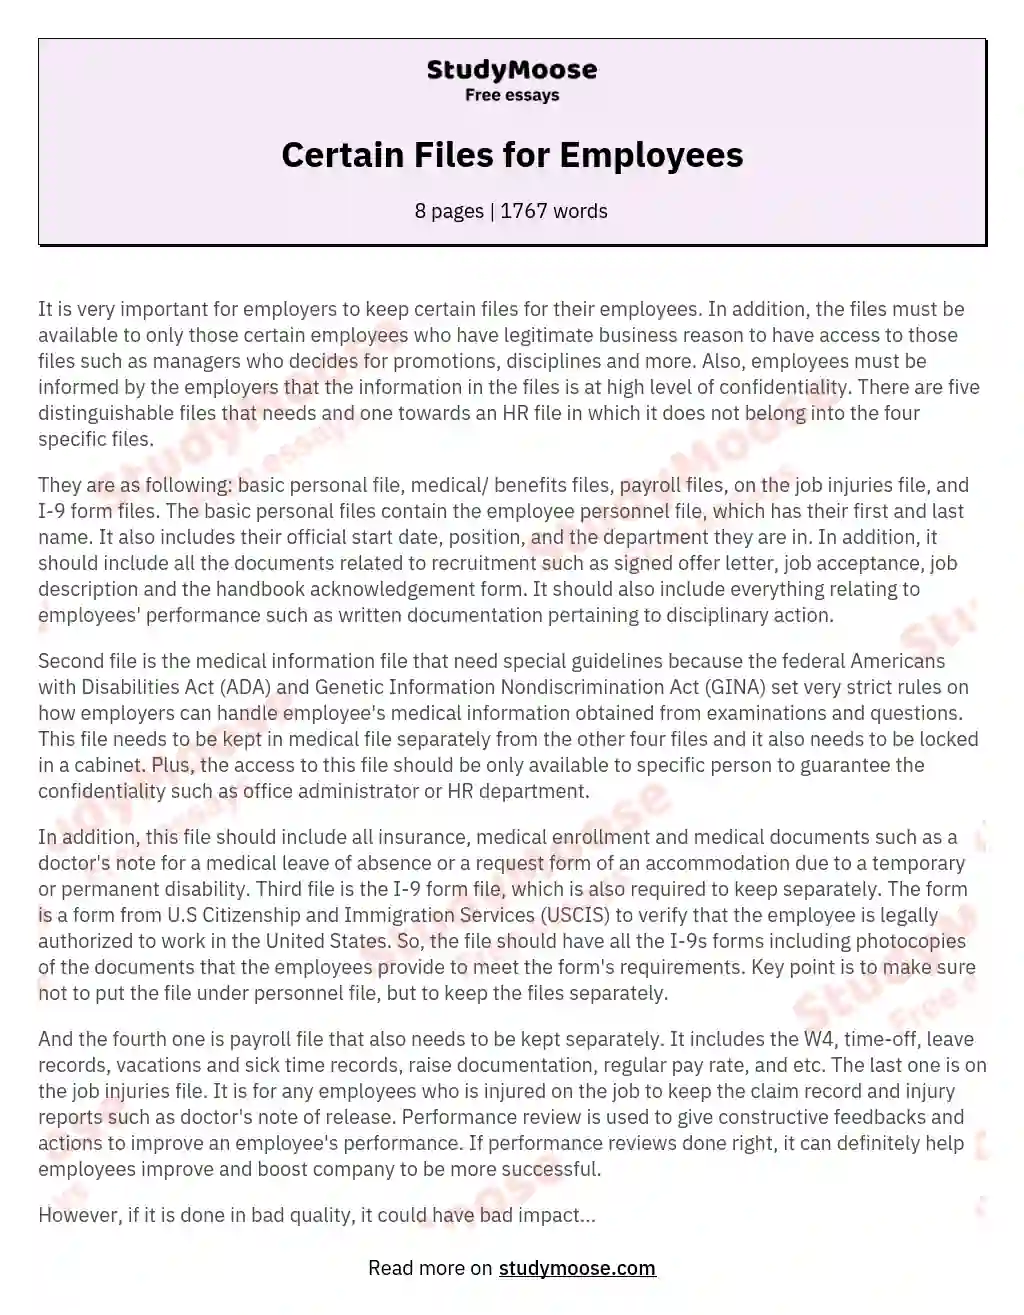 Certain Files for Employees essay